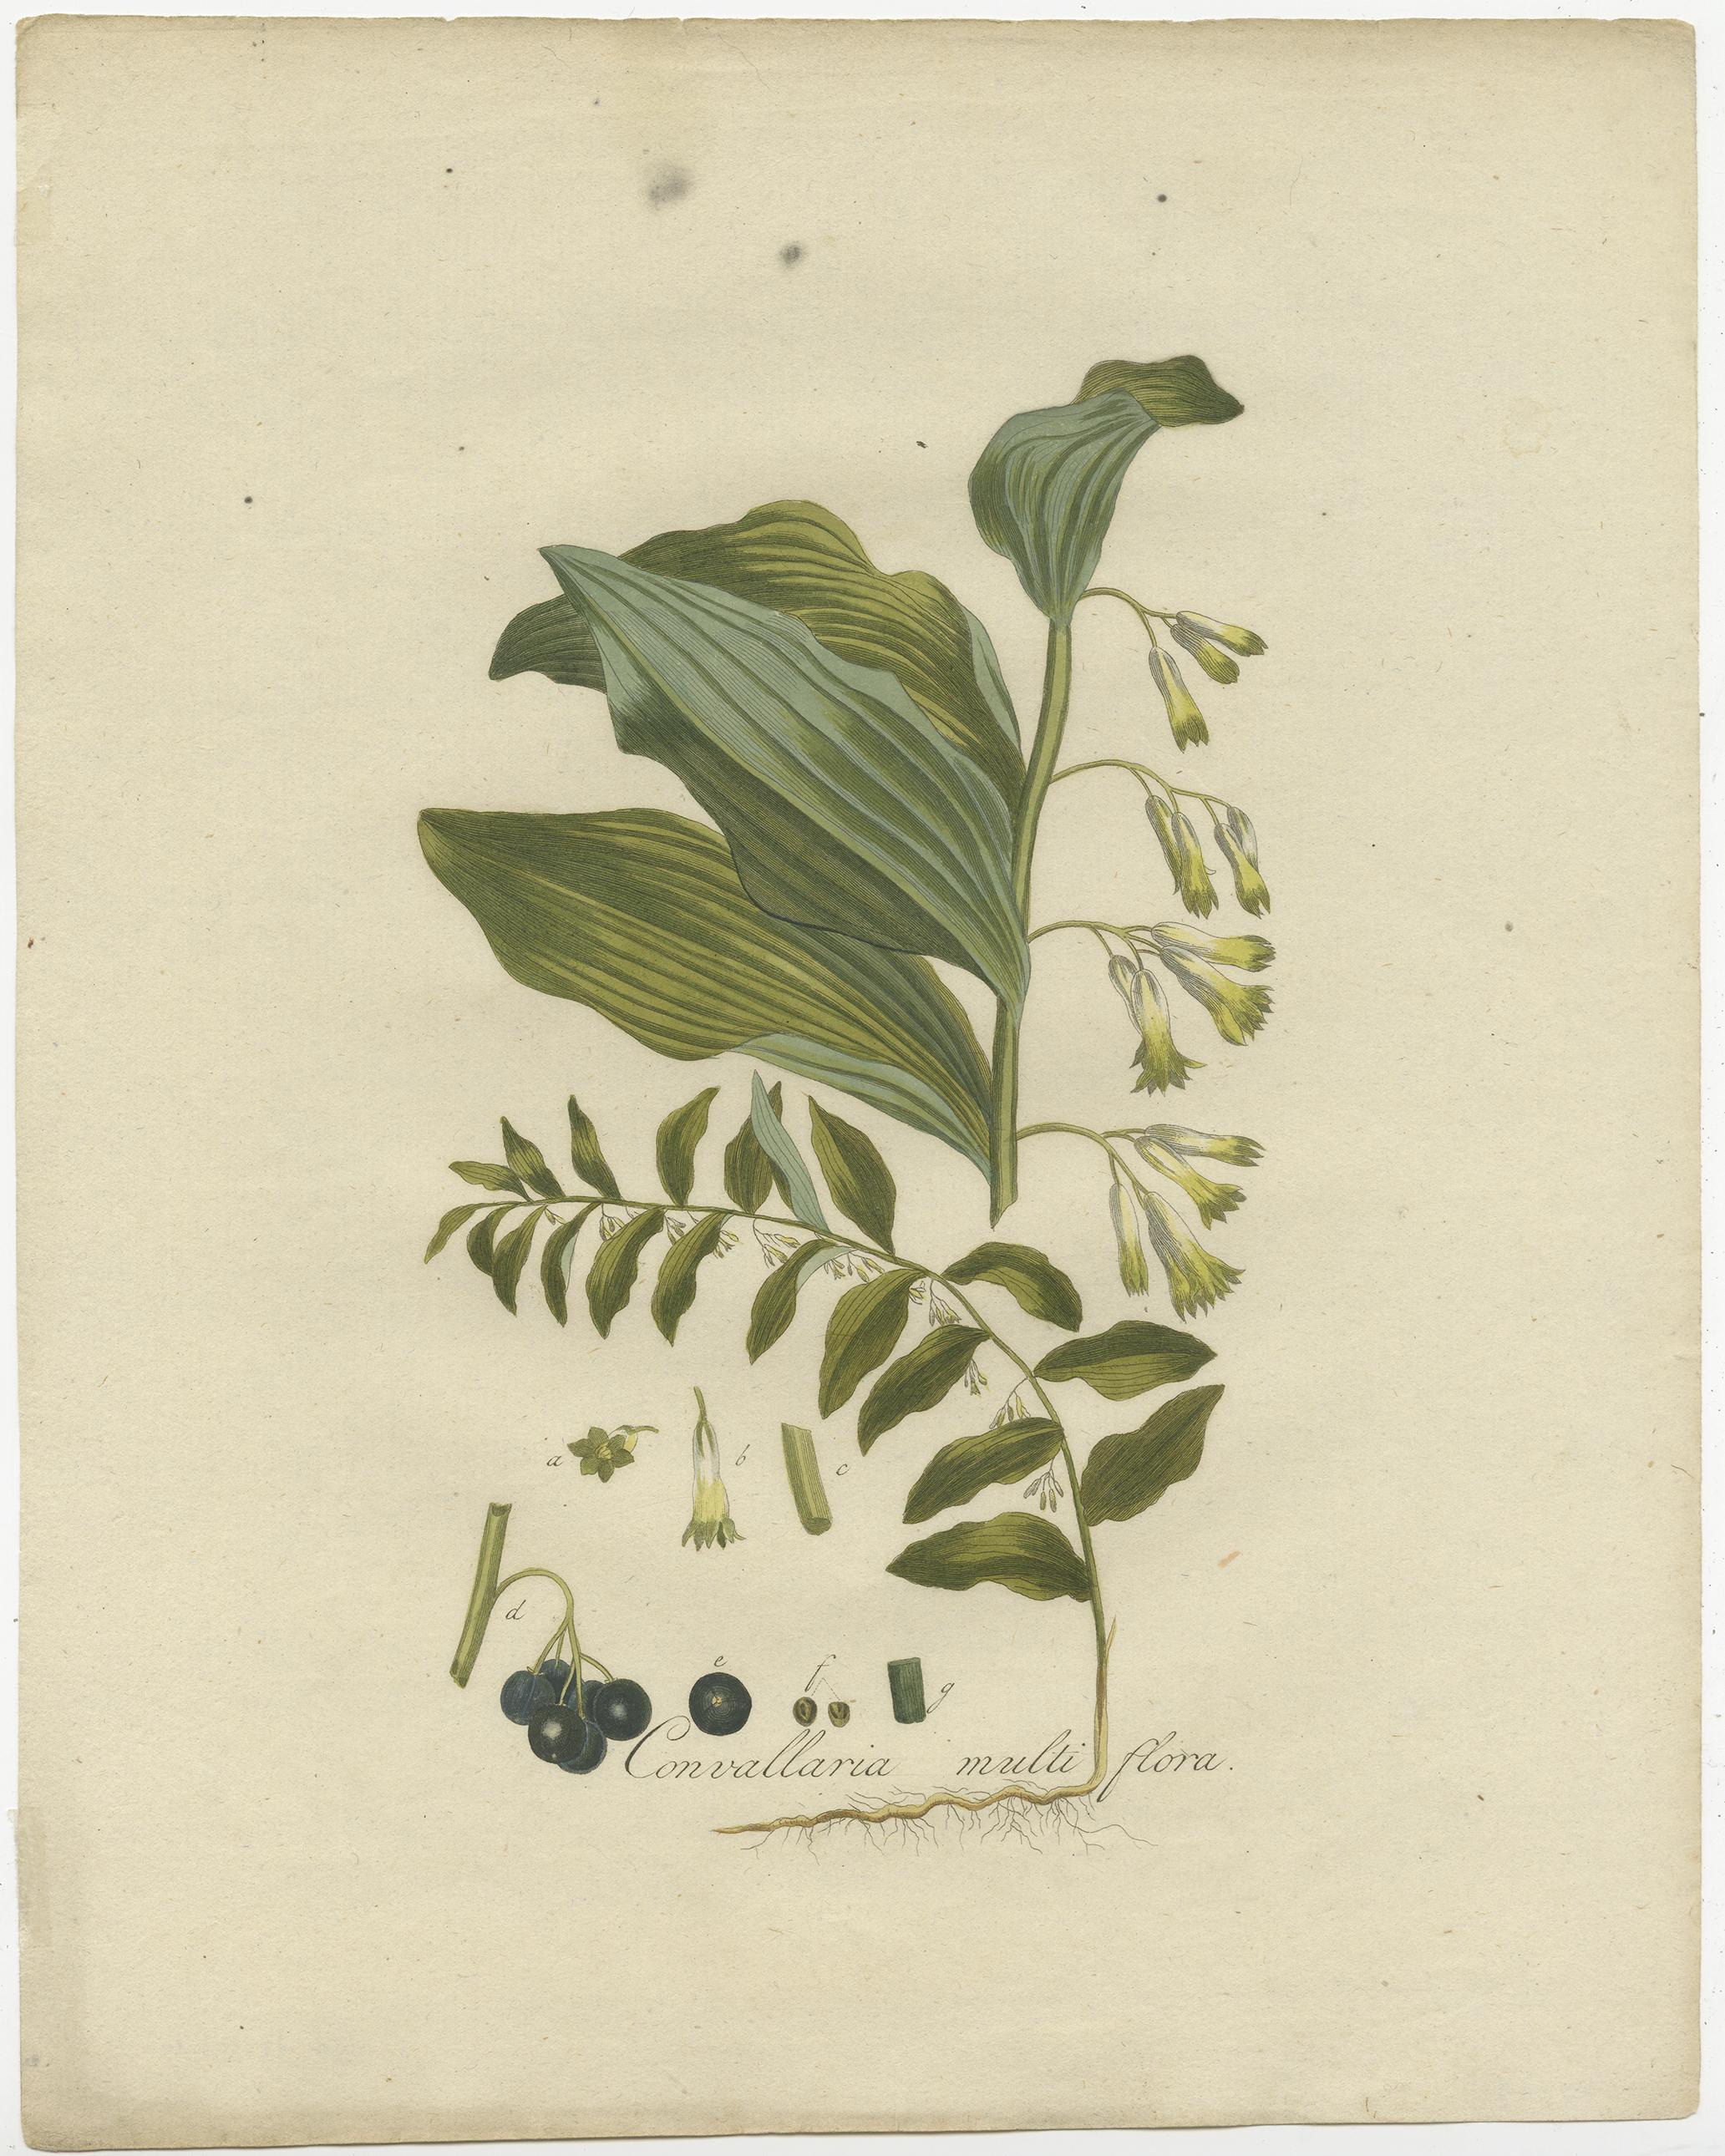 Antique print titled 'Convallaria Multiflora'. Original antique print of Polygonatum multiflorum, the Solomon's seal, David's harp, ladder-to-heaven or Eurasian Solomon's seal, is a species of flowering plant in the family Asparagaceae, native to